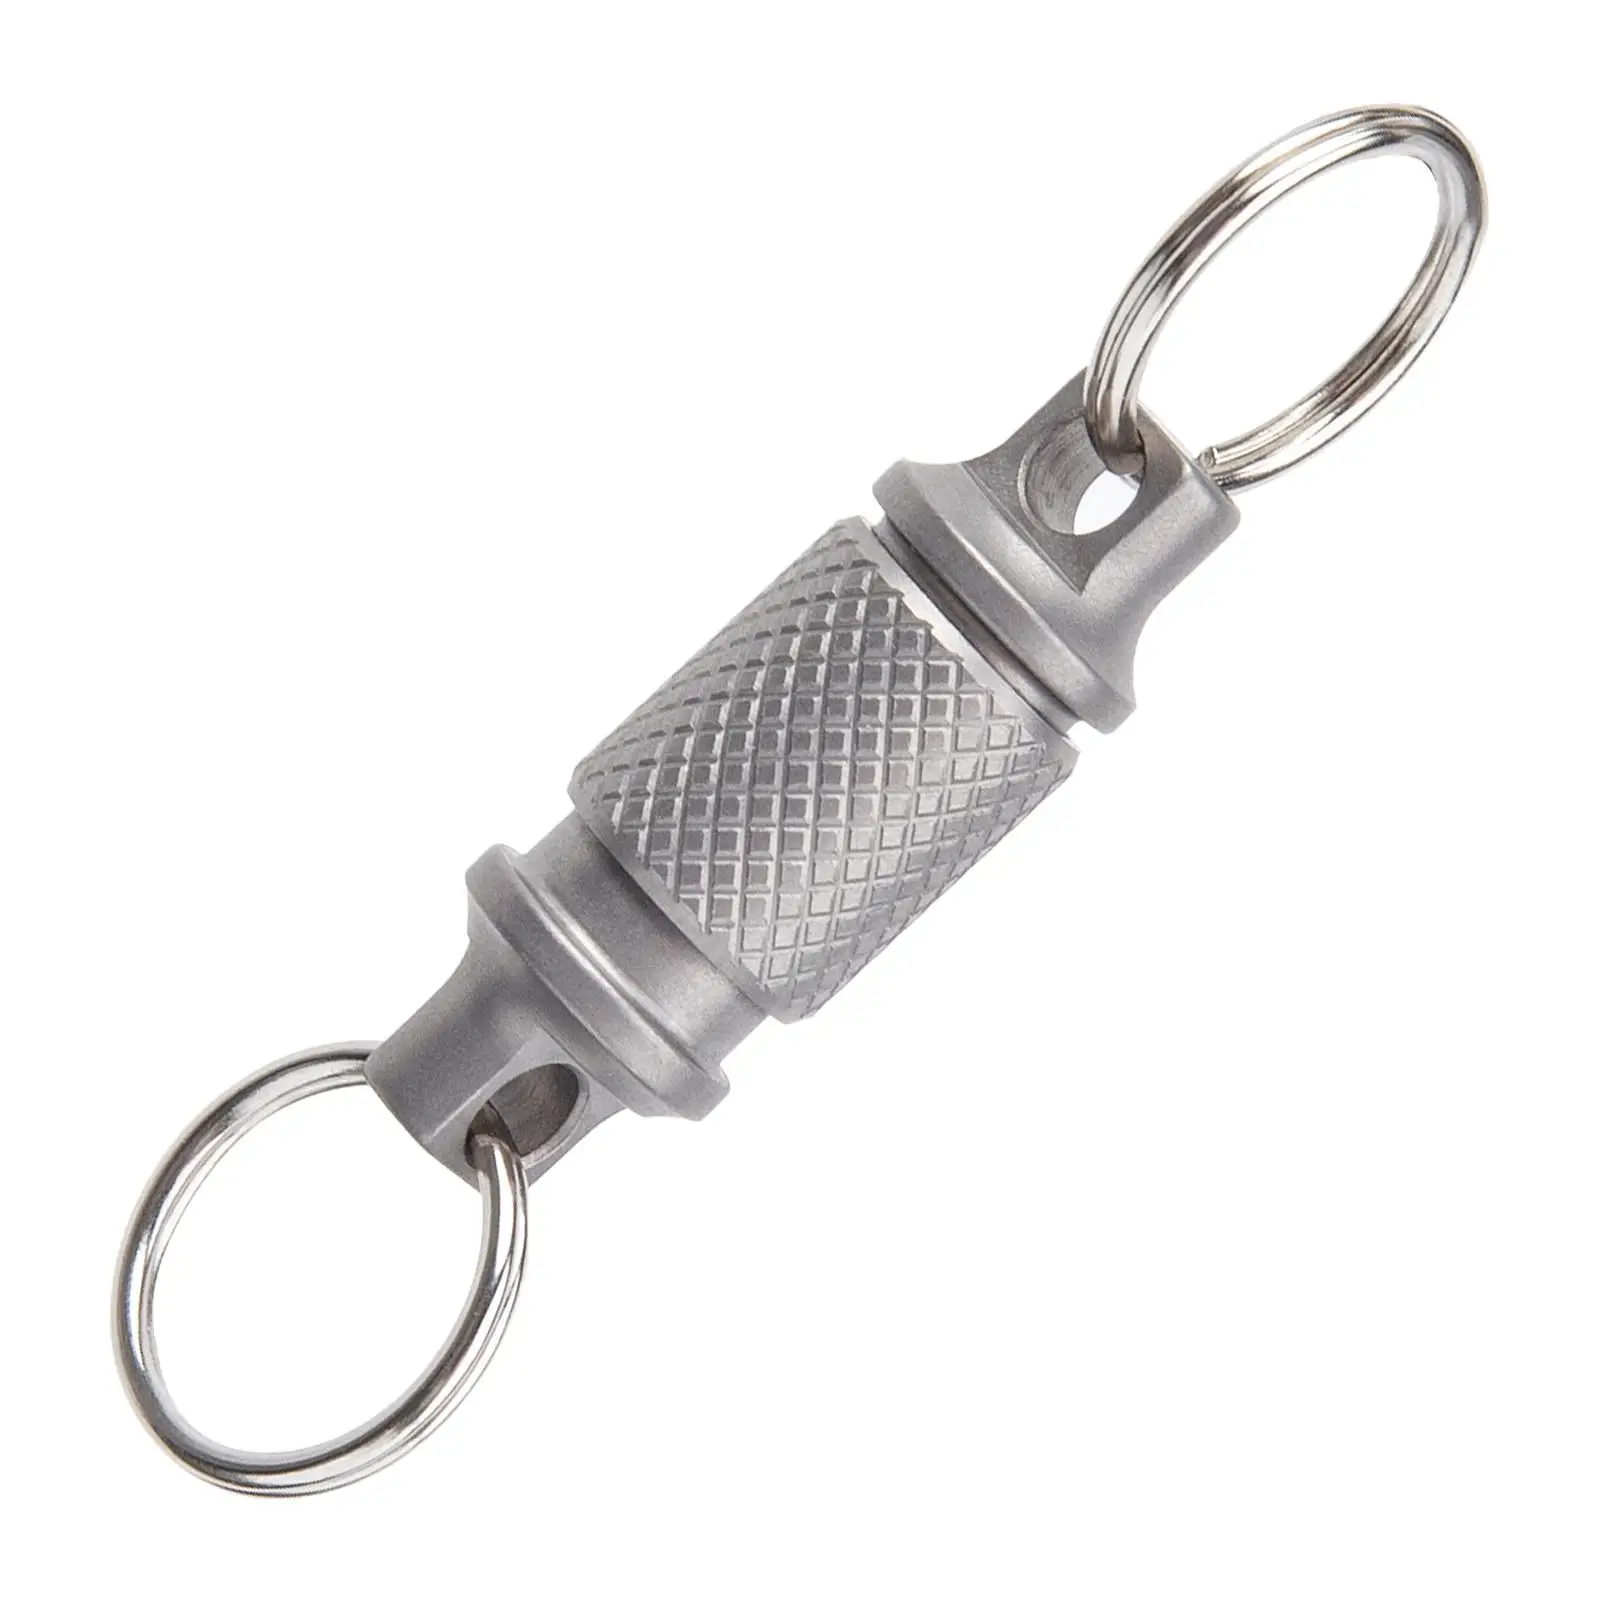 Keychain Quick Buckle Portable Rotary Keychain Detachable Multifunctional Clip